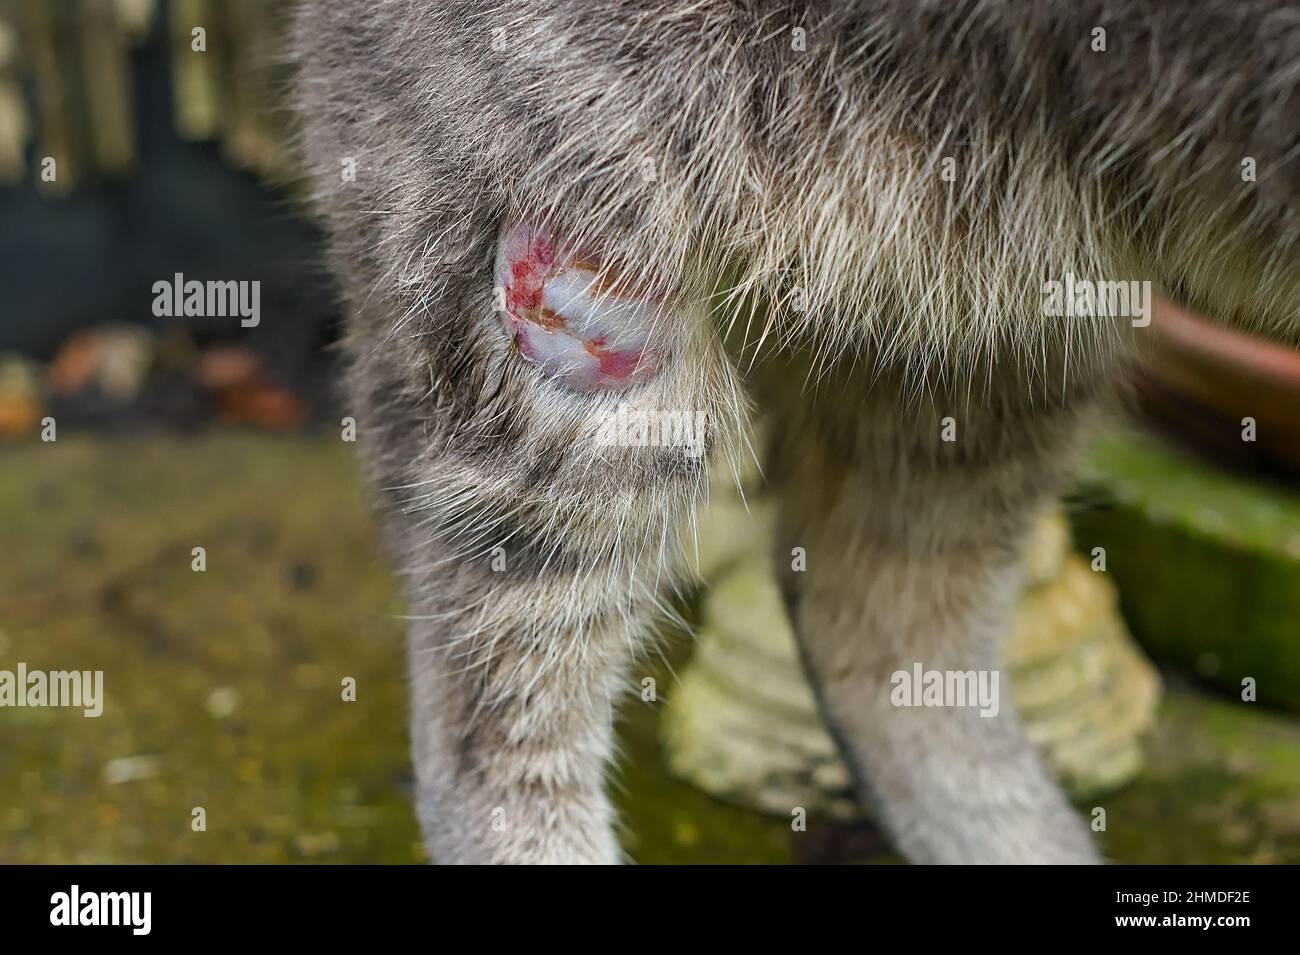 Cat standing with an injury causing an abscess on his upper leg Stock Photo